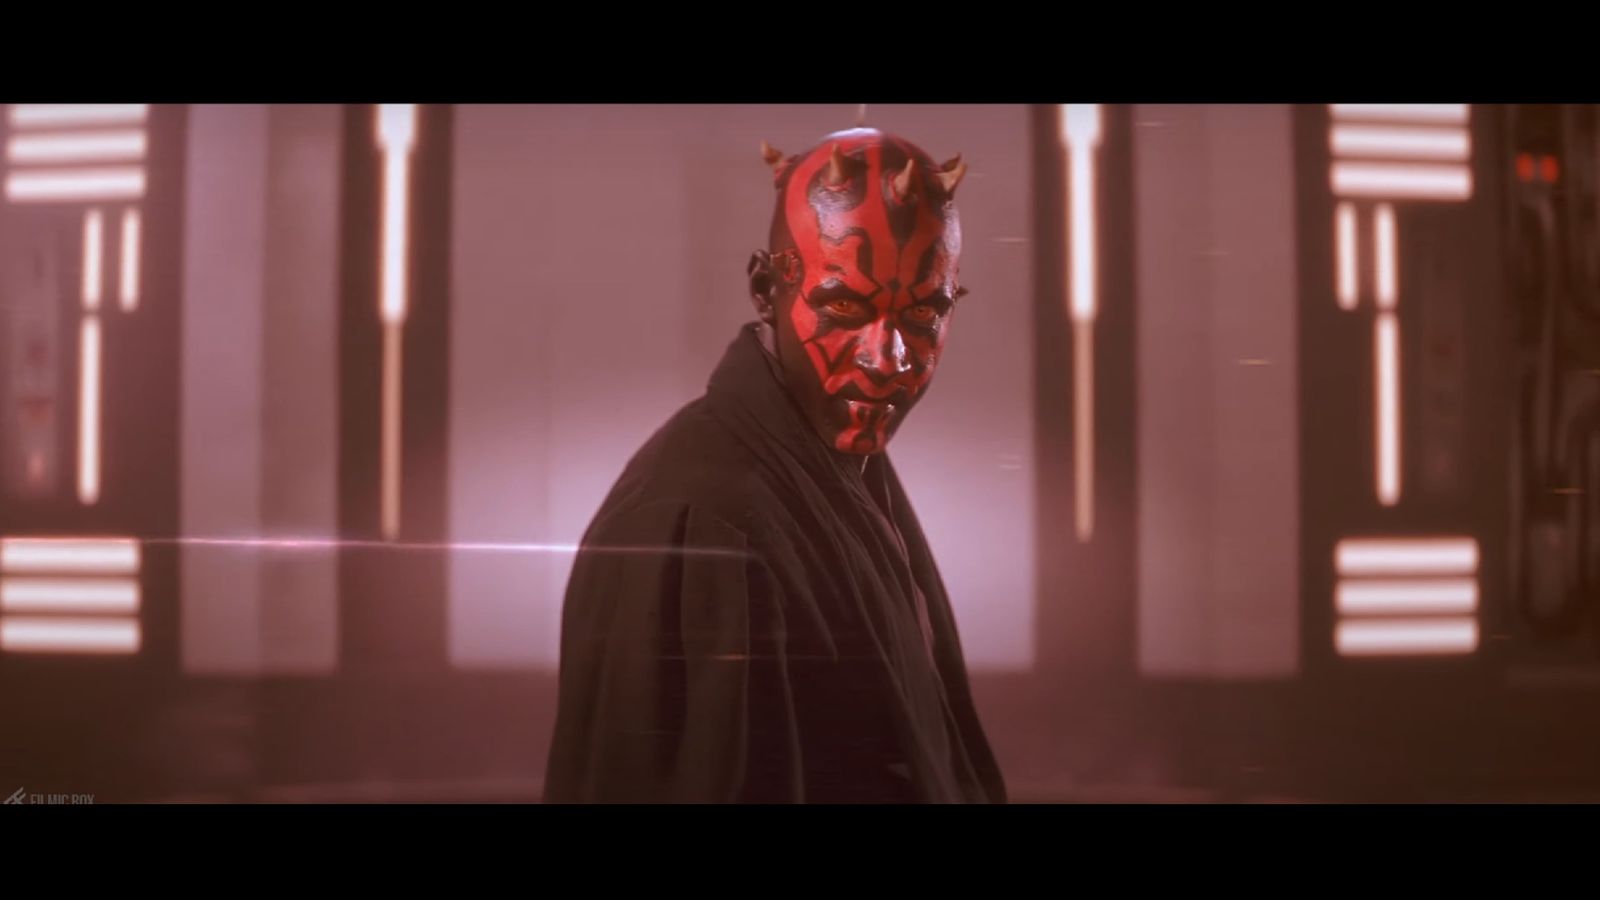 May the Fourth be with you jokes: Ray Park / Peter Serafinowicz as Darth Maul in Star Wars: Episode I – The Phantom Menace